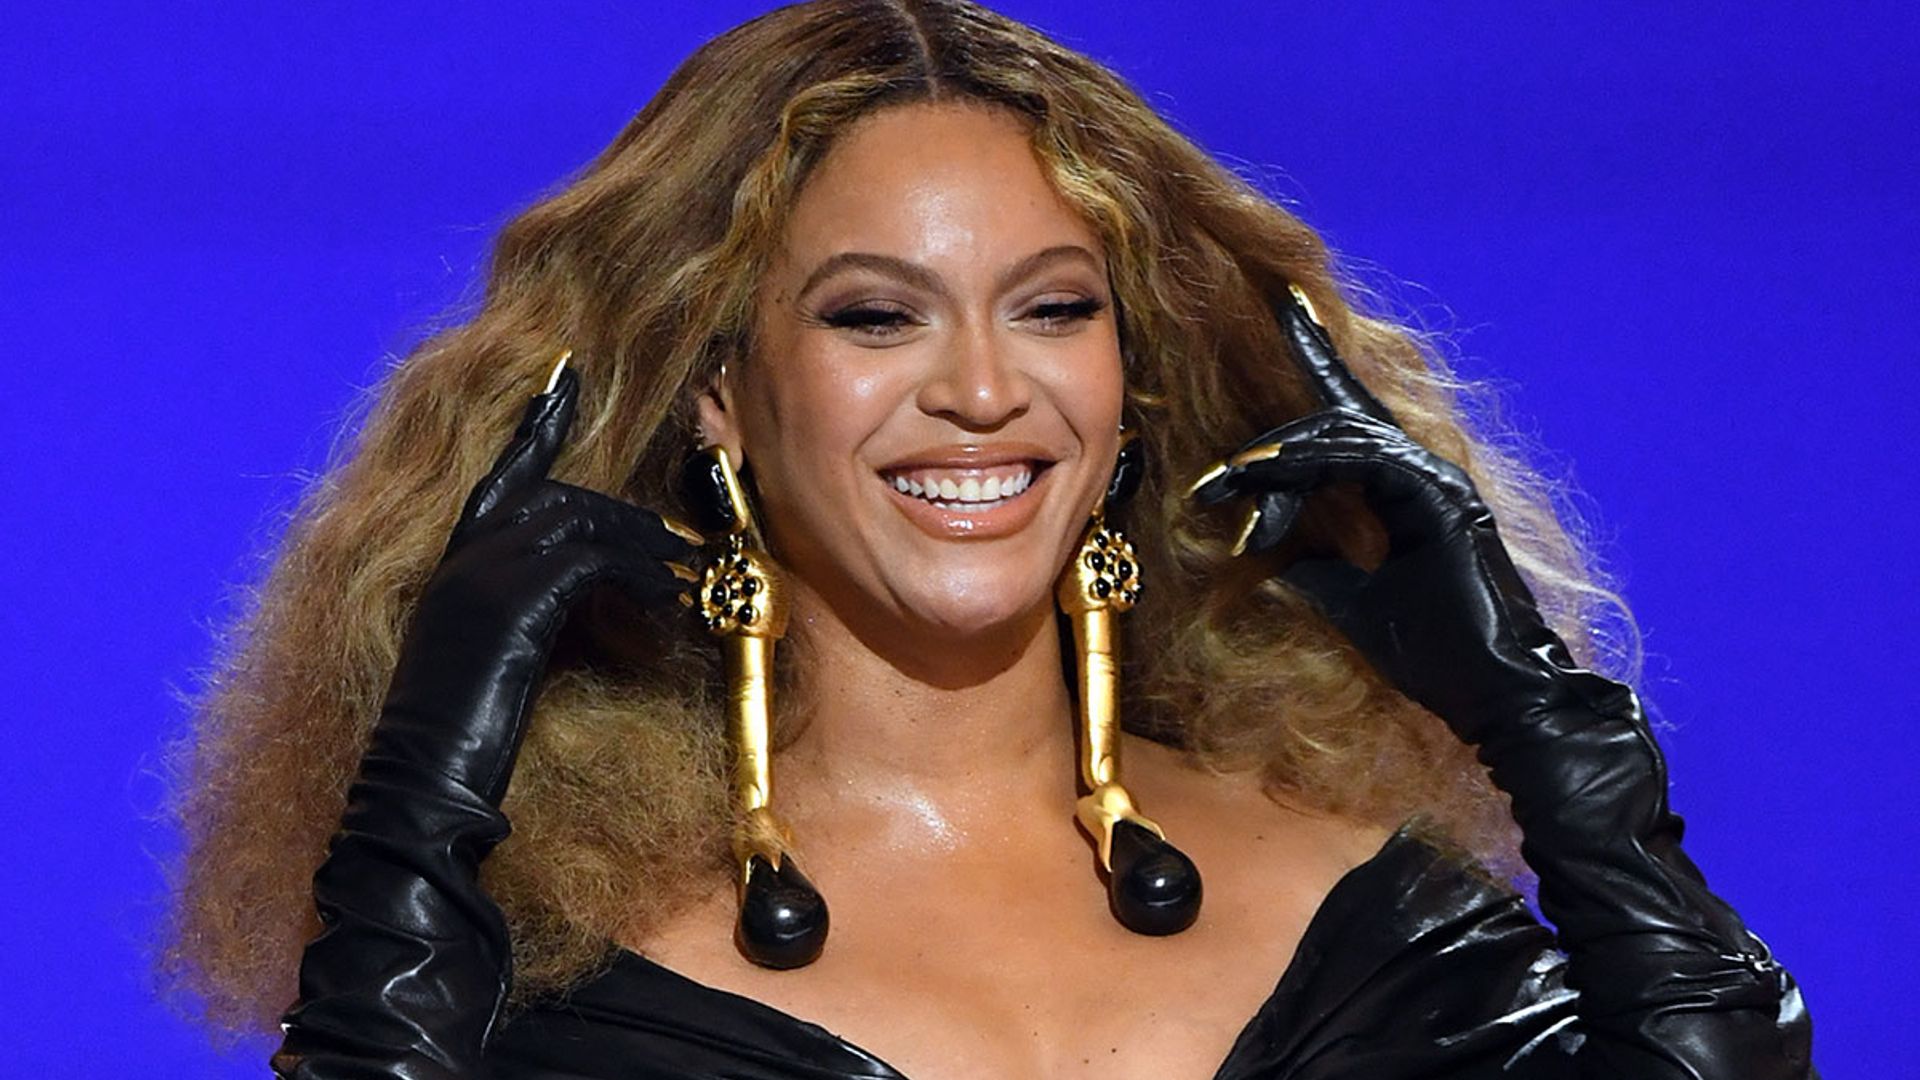 Beyonc shares new photo featuring her three children at Halloween leaving fans shocked